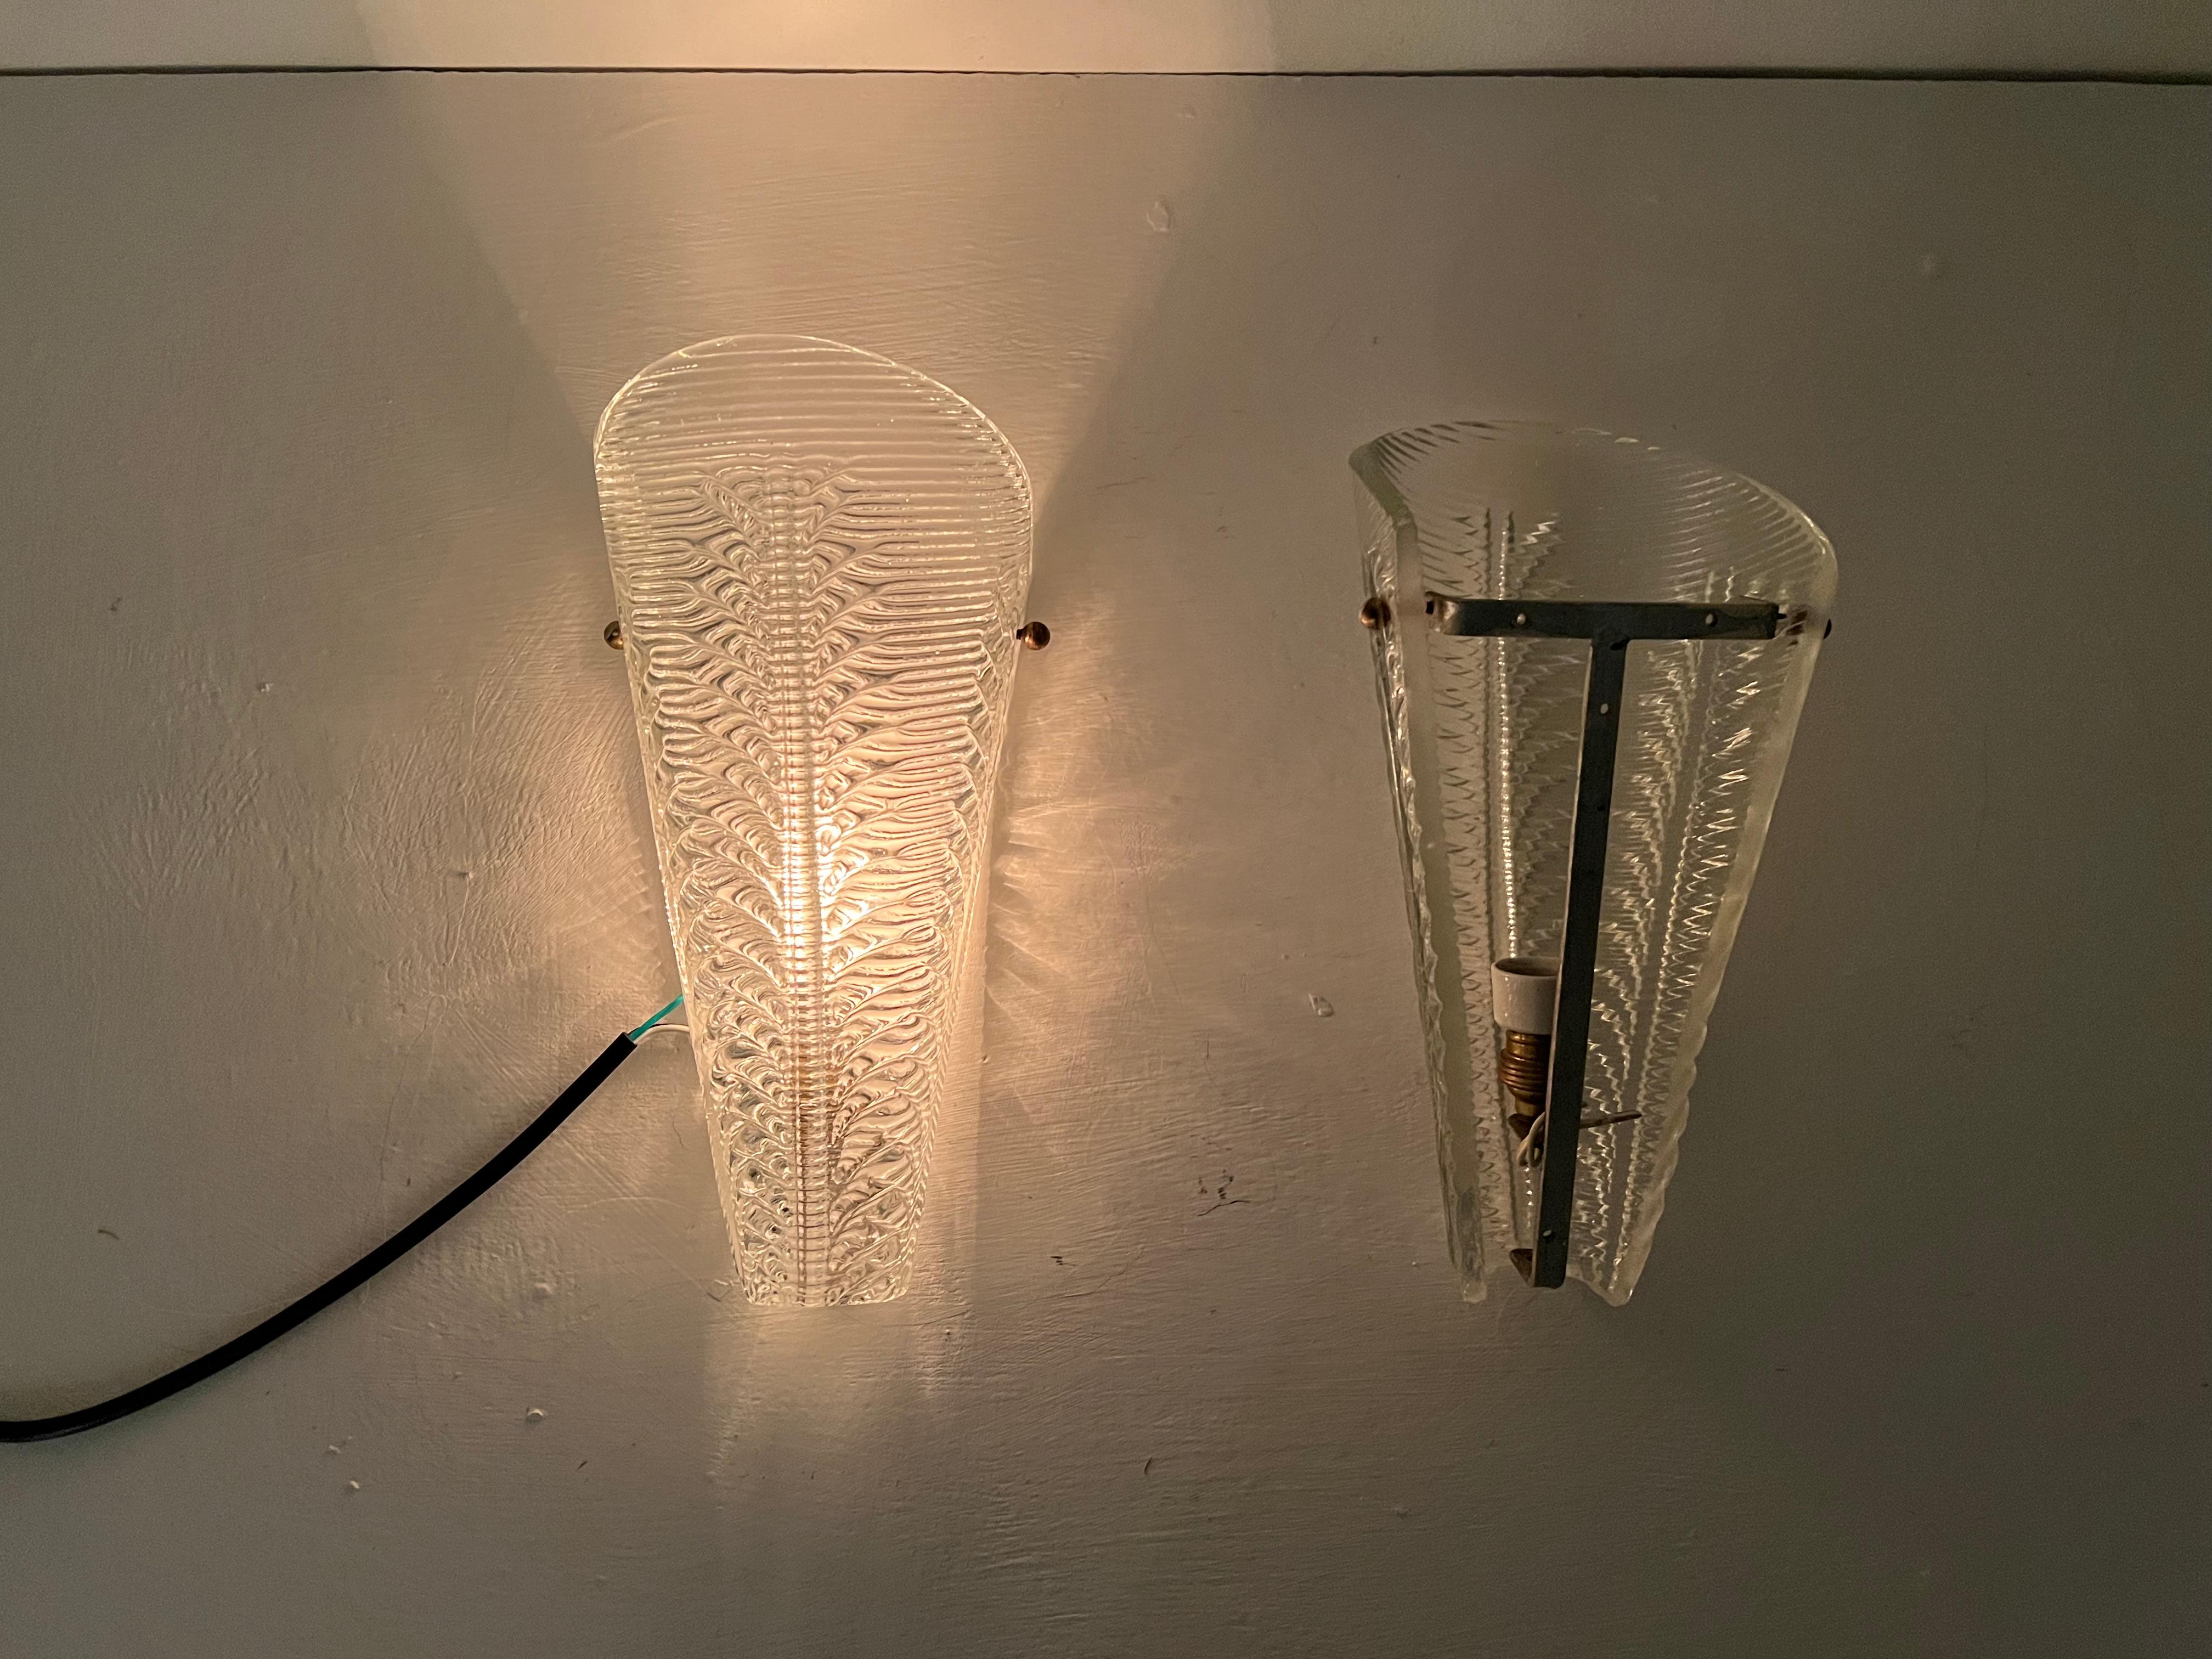 Pair of Art Deco Sconces, circa 1940 by Seguso in Murano Glass, Italy, 1940s For Sale 2